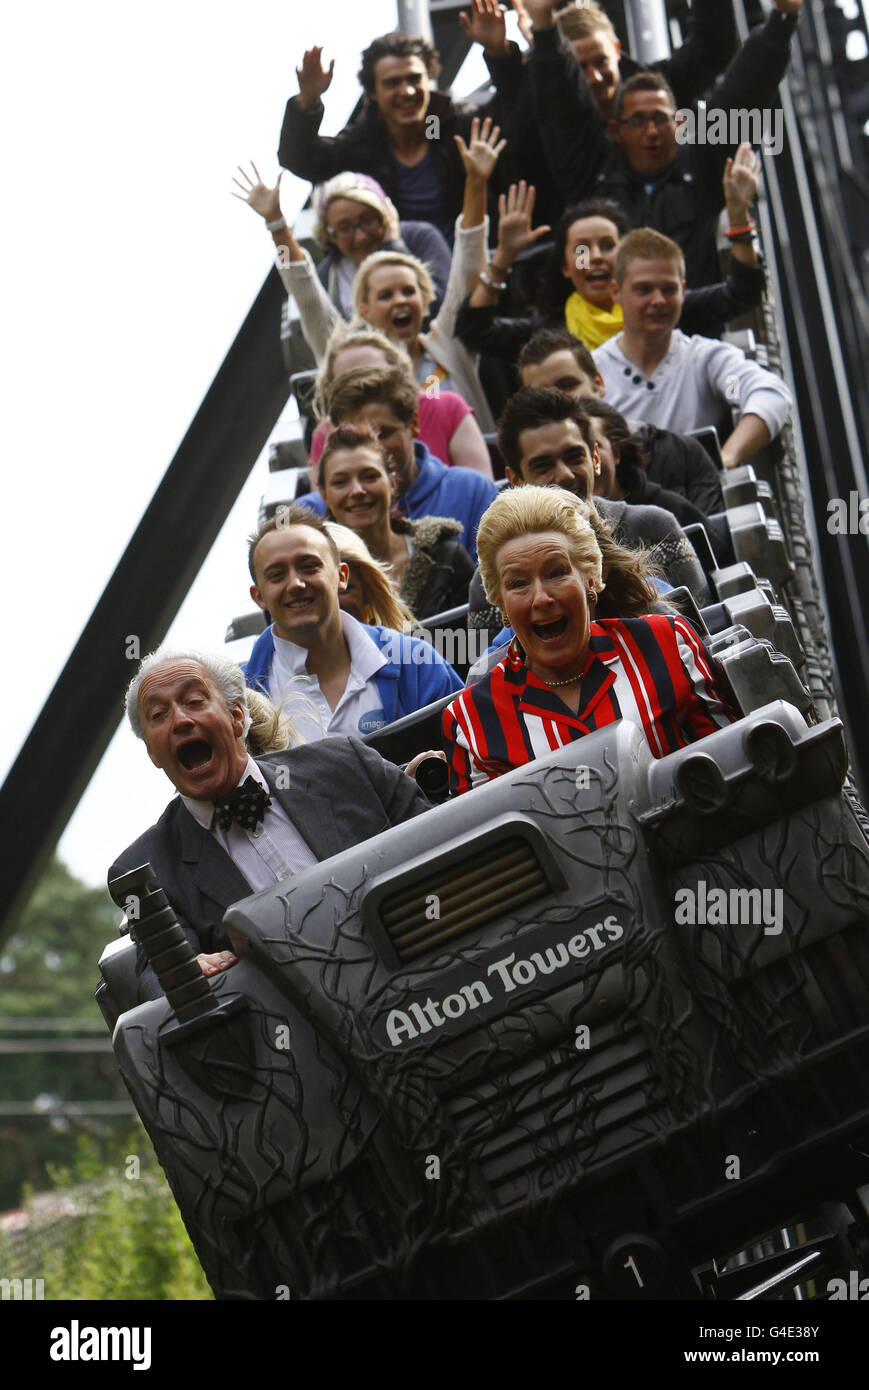 Neil and Christine Hamilton launch Alton Towers Resort's Roller Coaster Election by riding its 'Big Five' rides Nemesis, Oblivion, Air, Rita and TH13TEEN and casting a vote for their favourite ride. Stock Photo